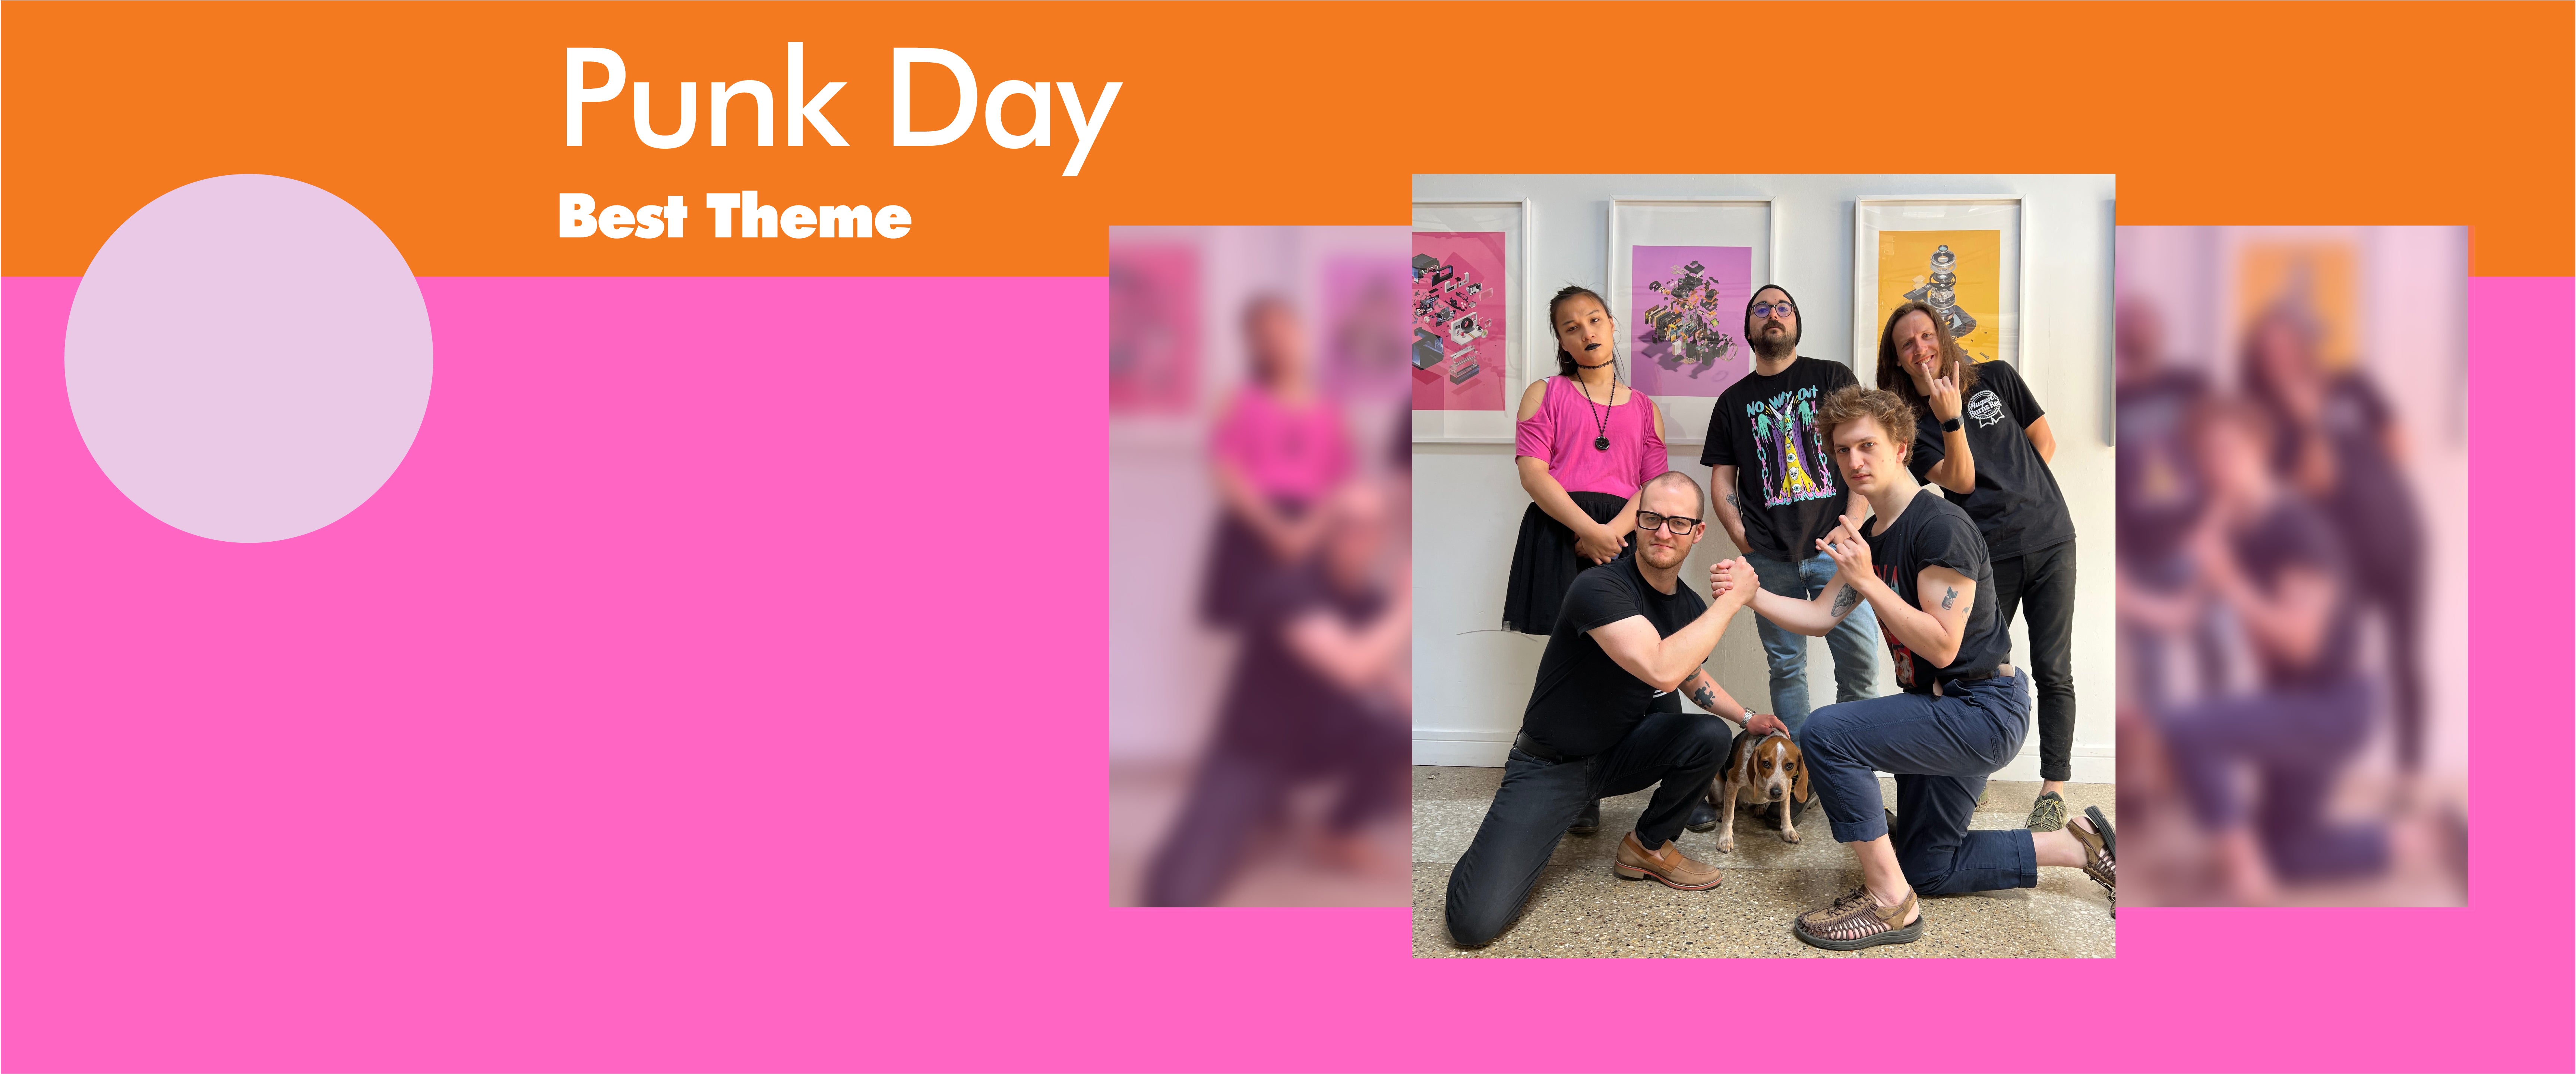 Stat: Best theme was punk day. Image is of the Cam Fam dressed in mostly goth/punk attire.